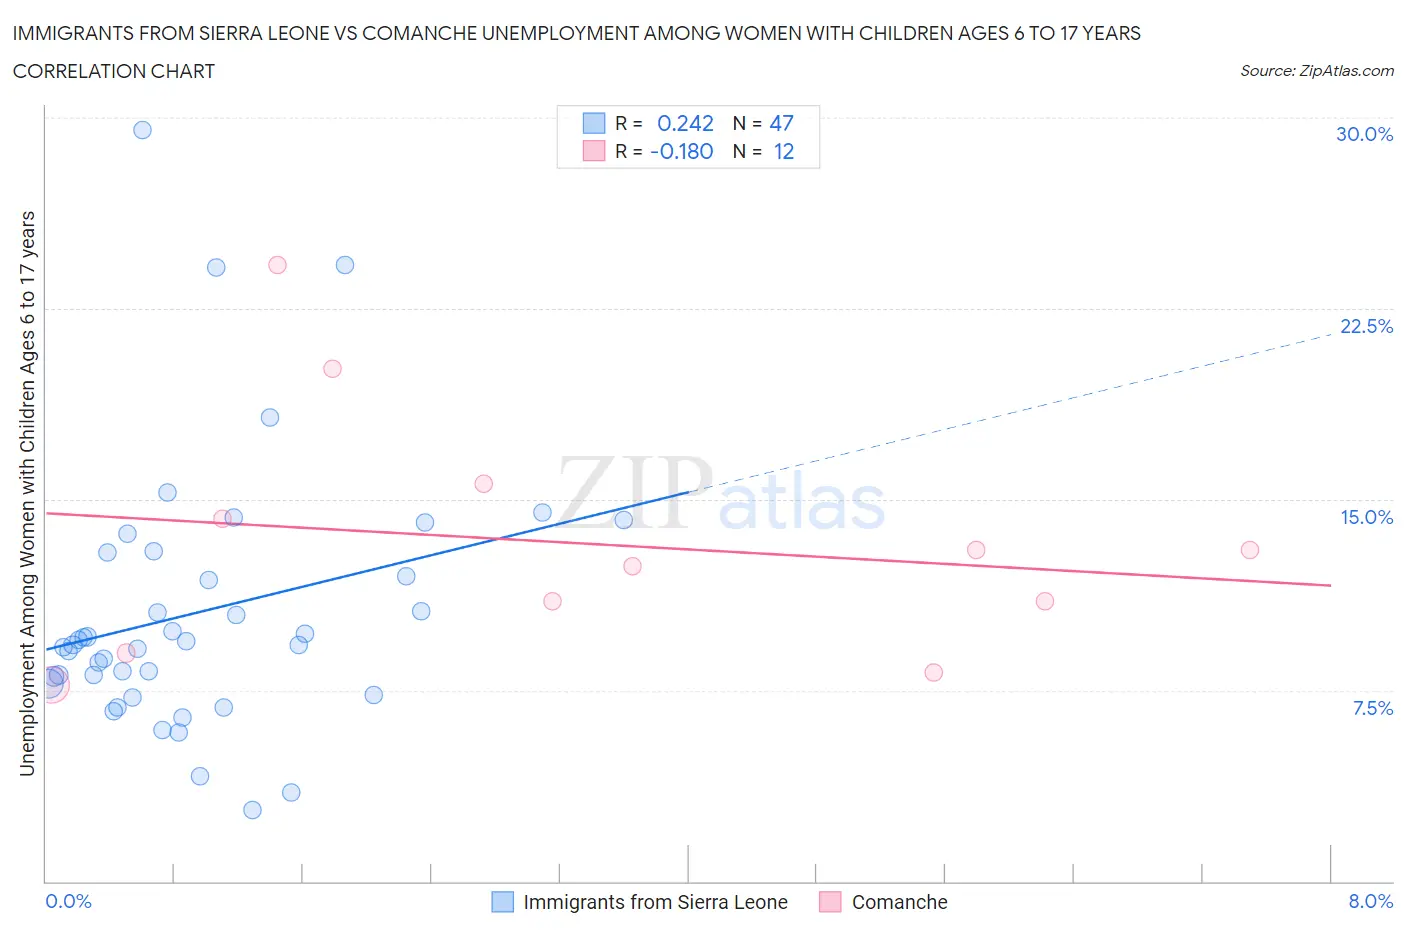 Immigrants from Sierra Leone vs Comanche Unemployment Among Women with Children Ages 6 to 17 years